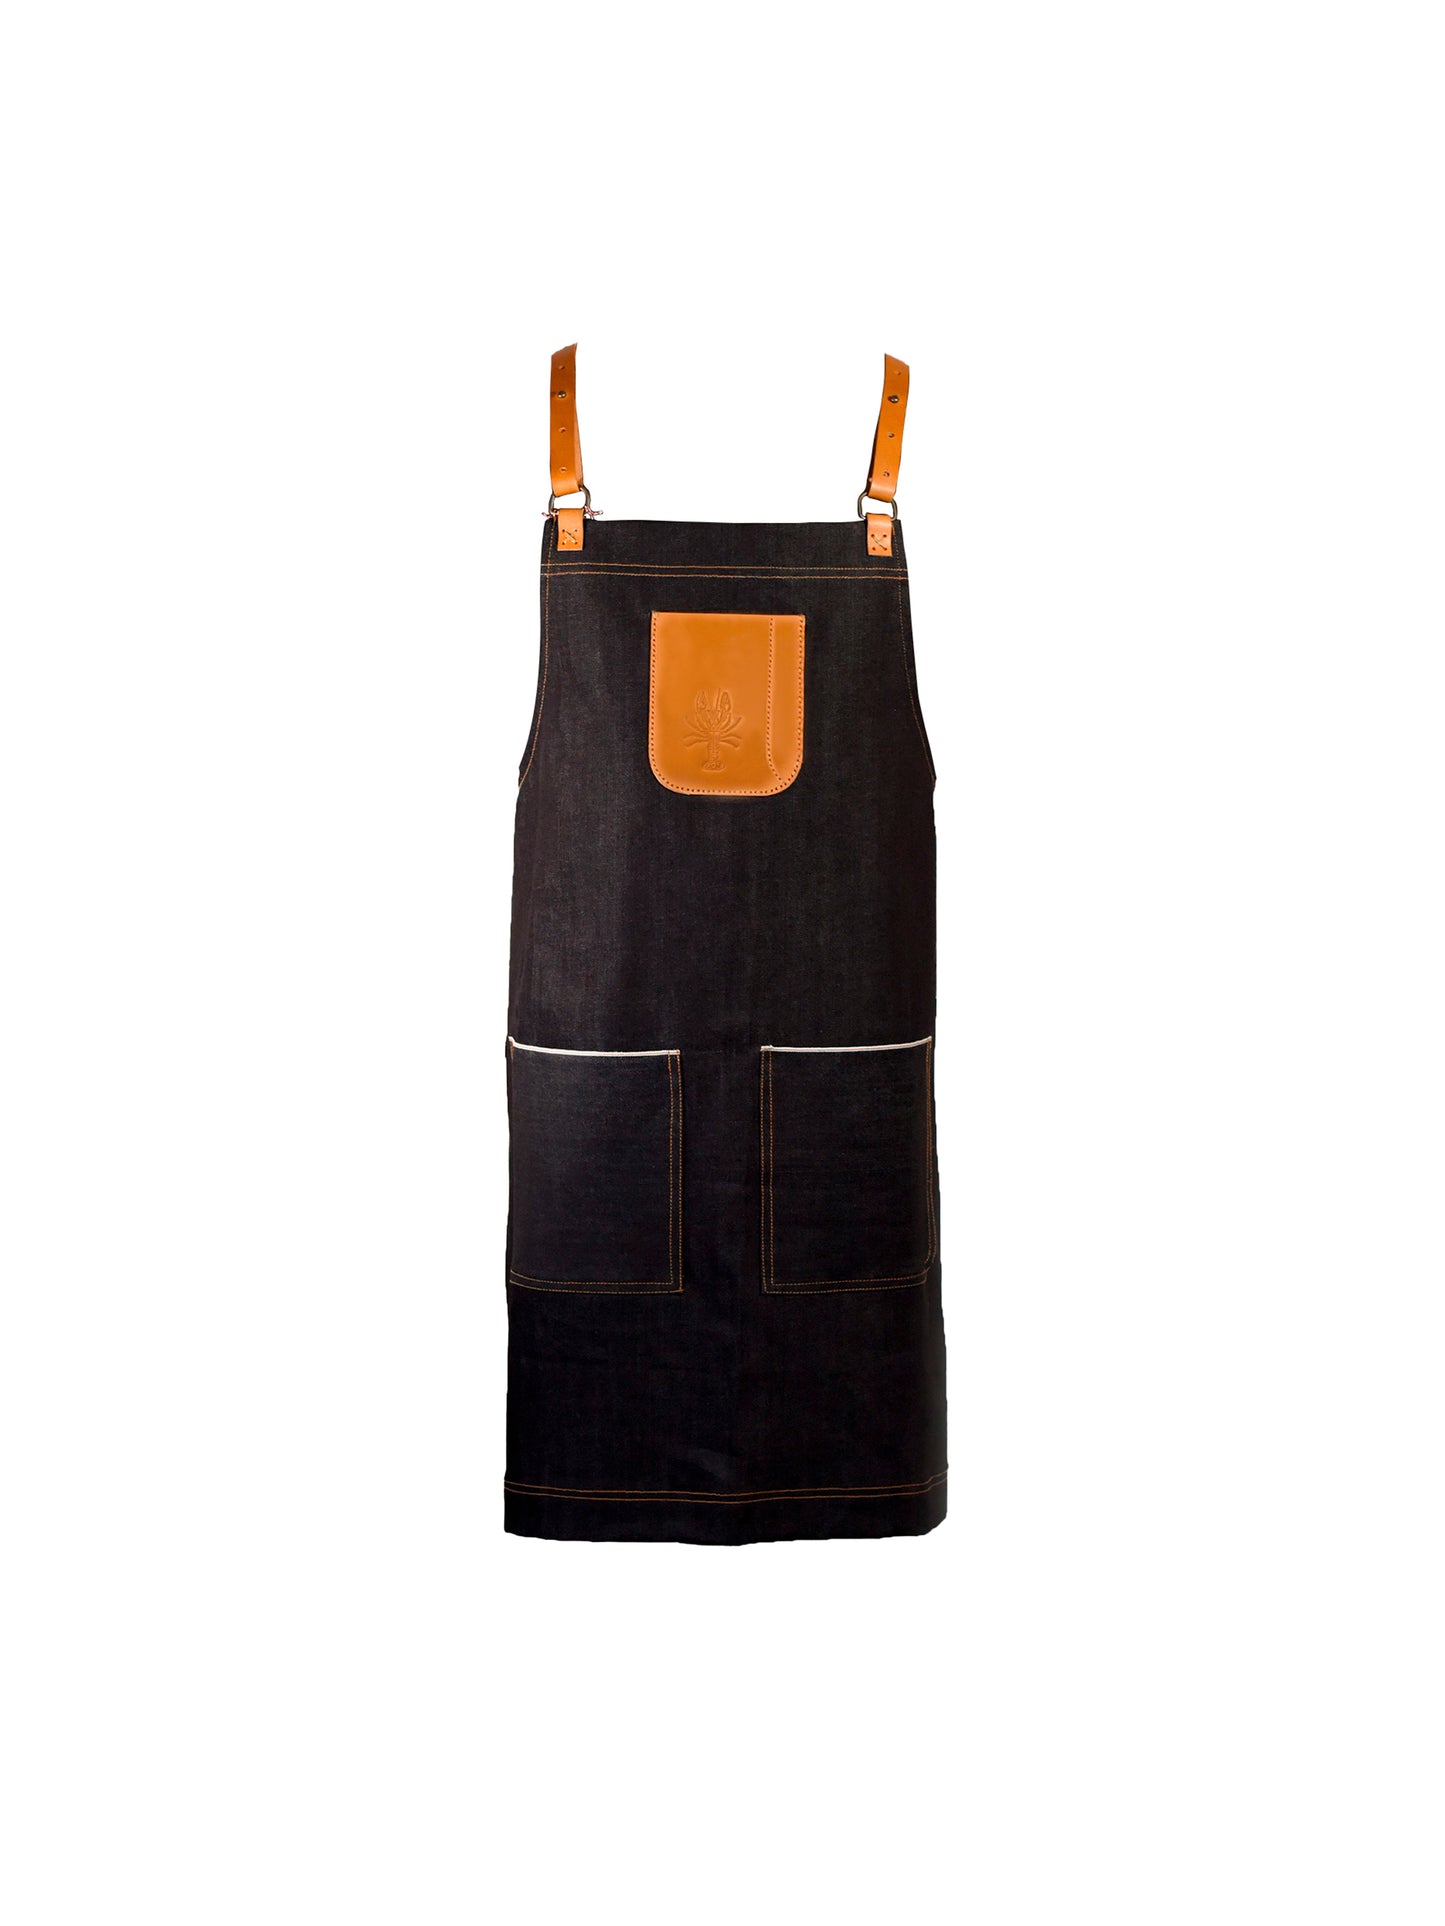 Japanese Selvede Denim & Leather Apron Camel Leather Weston Table